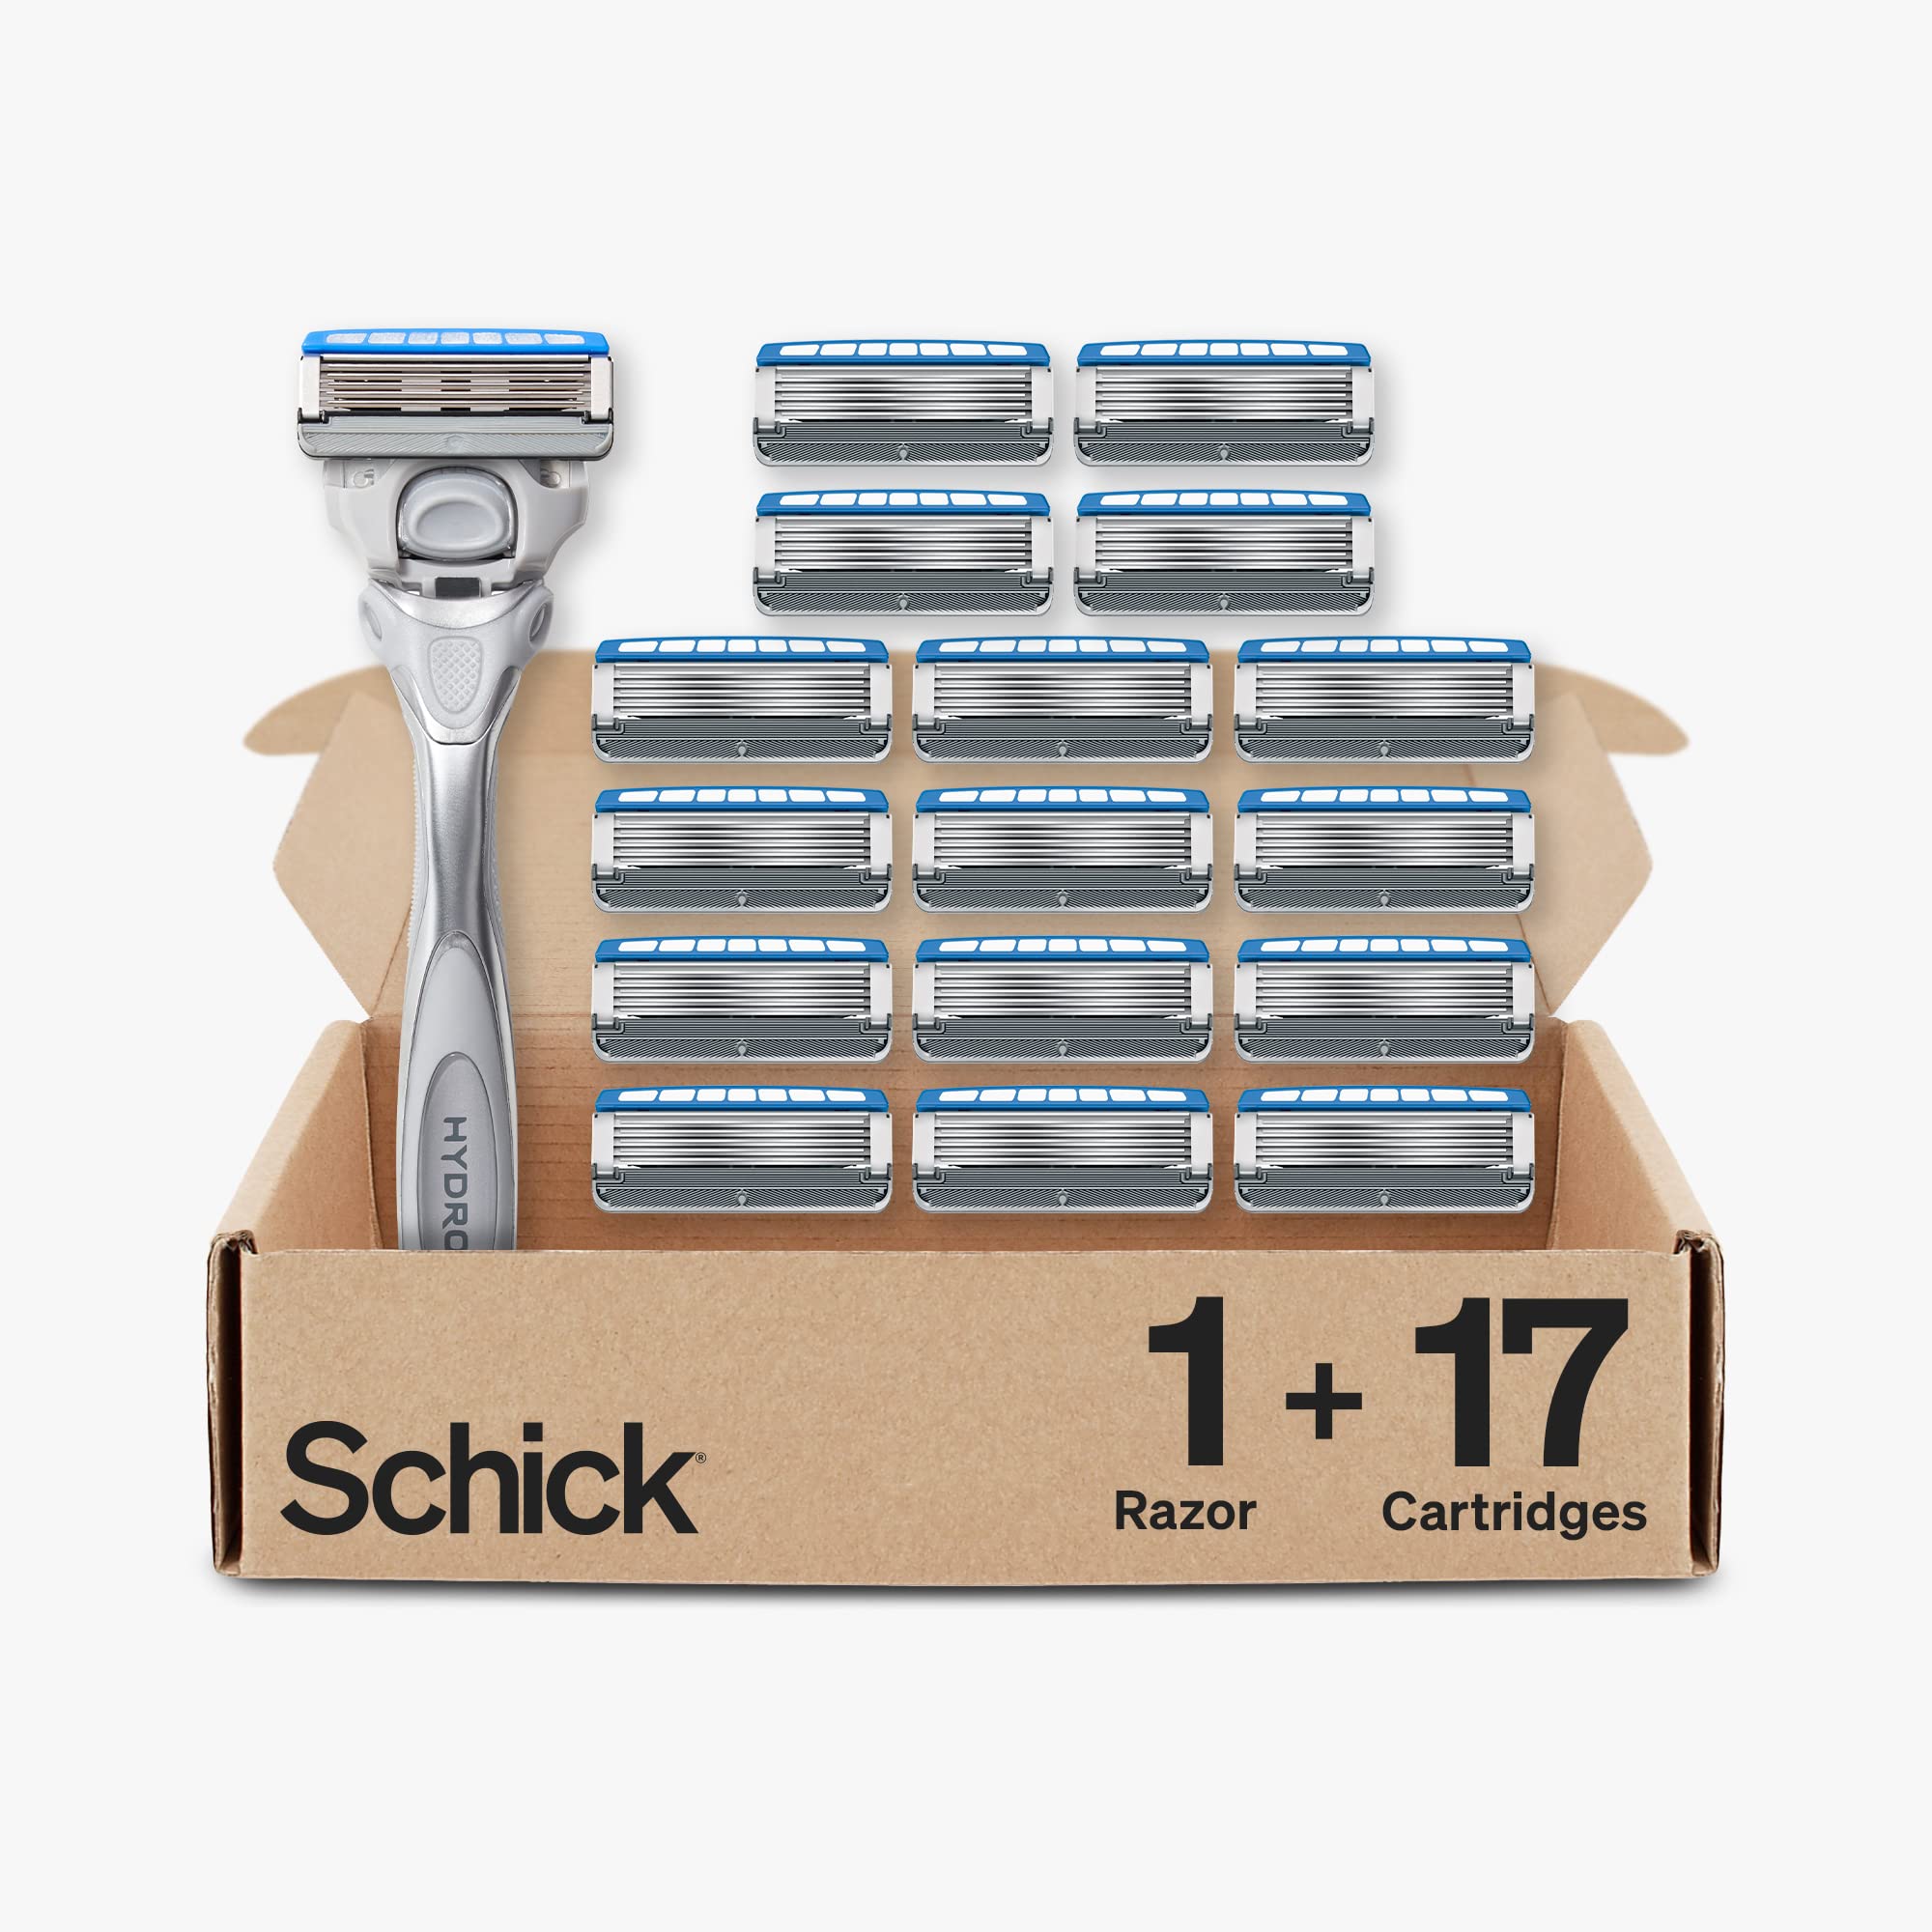 Schick Hydro Dry Skin Razor with 17 Razor Blades $22 with 40% Subscrbe & Save coupon YMMV - $22